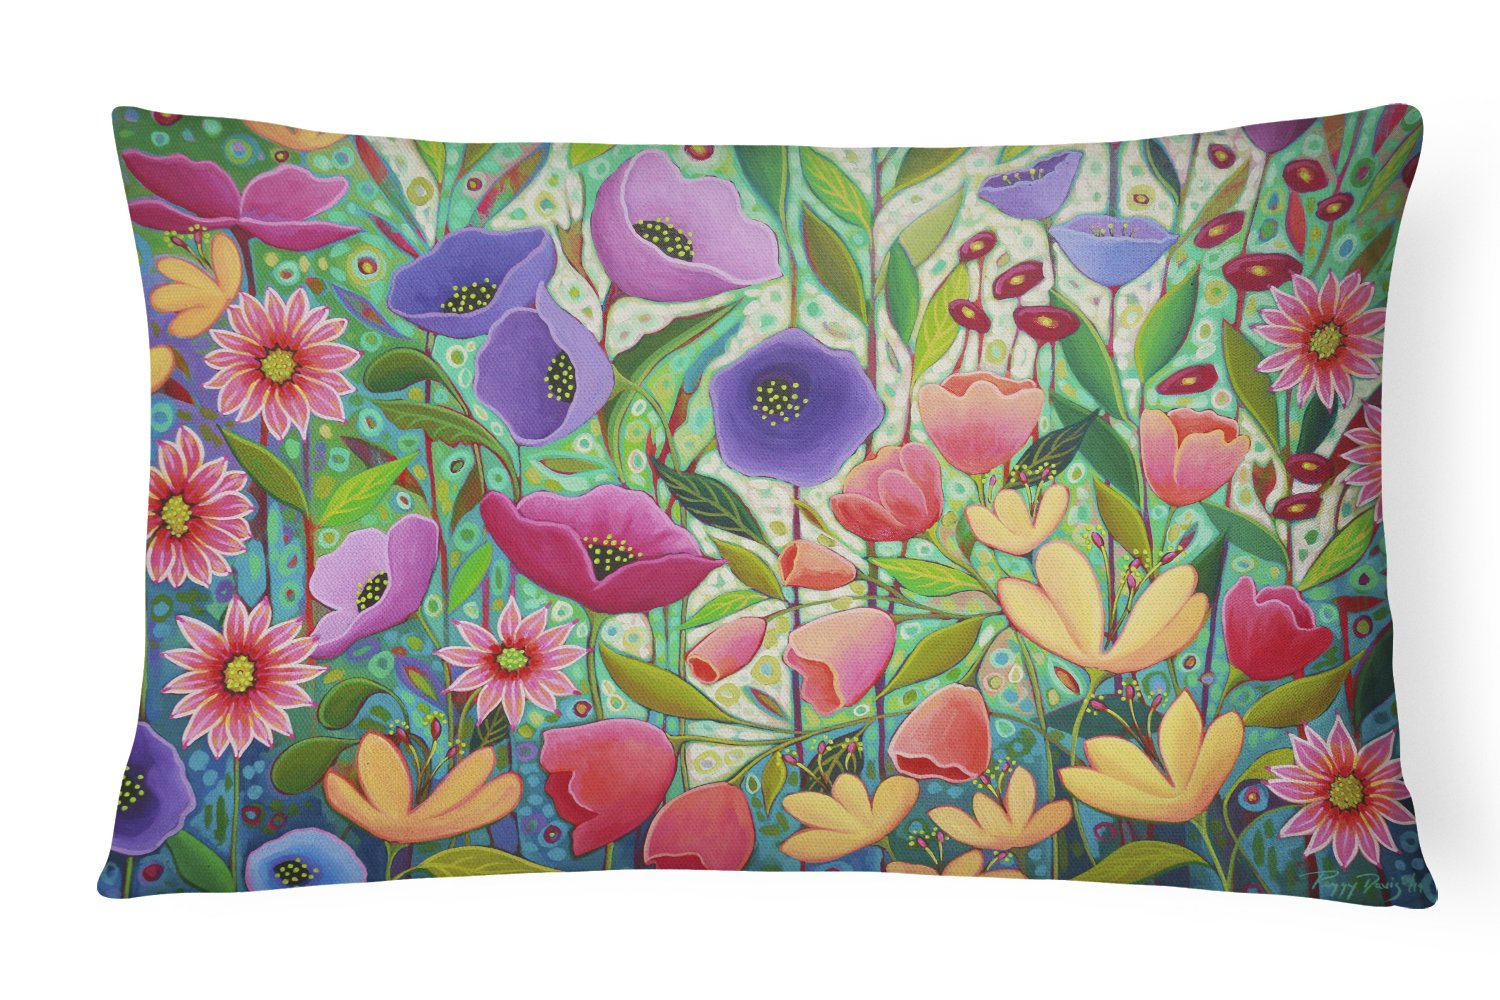 Enchanted Garden Flowers Canvas Fabric Decorative Pillow PPD3013PW1216 by Caroline's Treasures